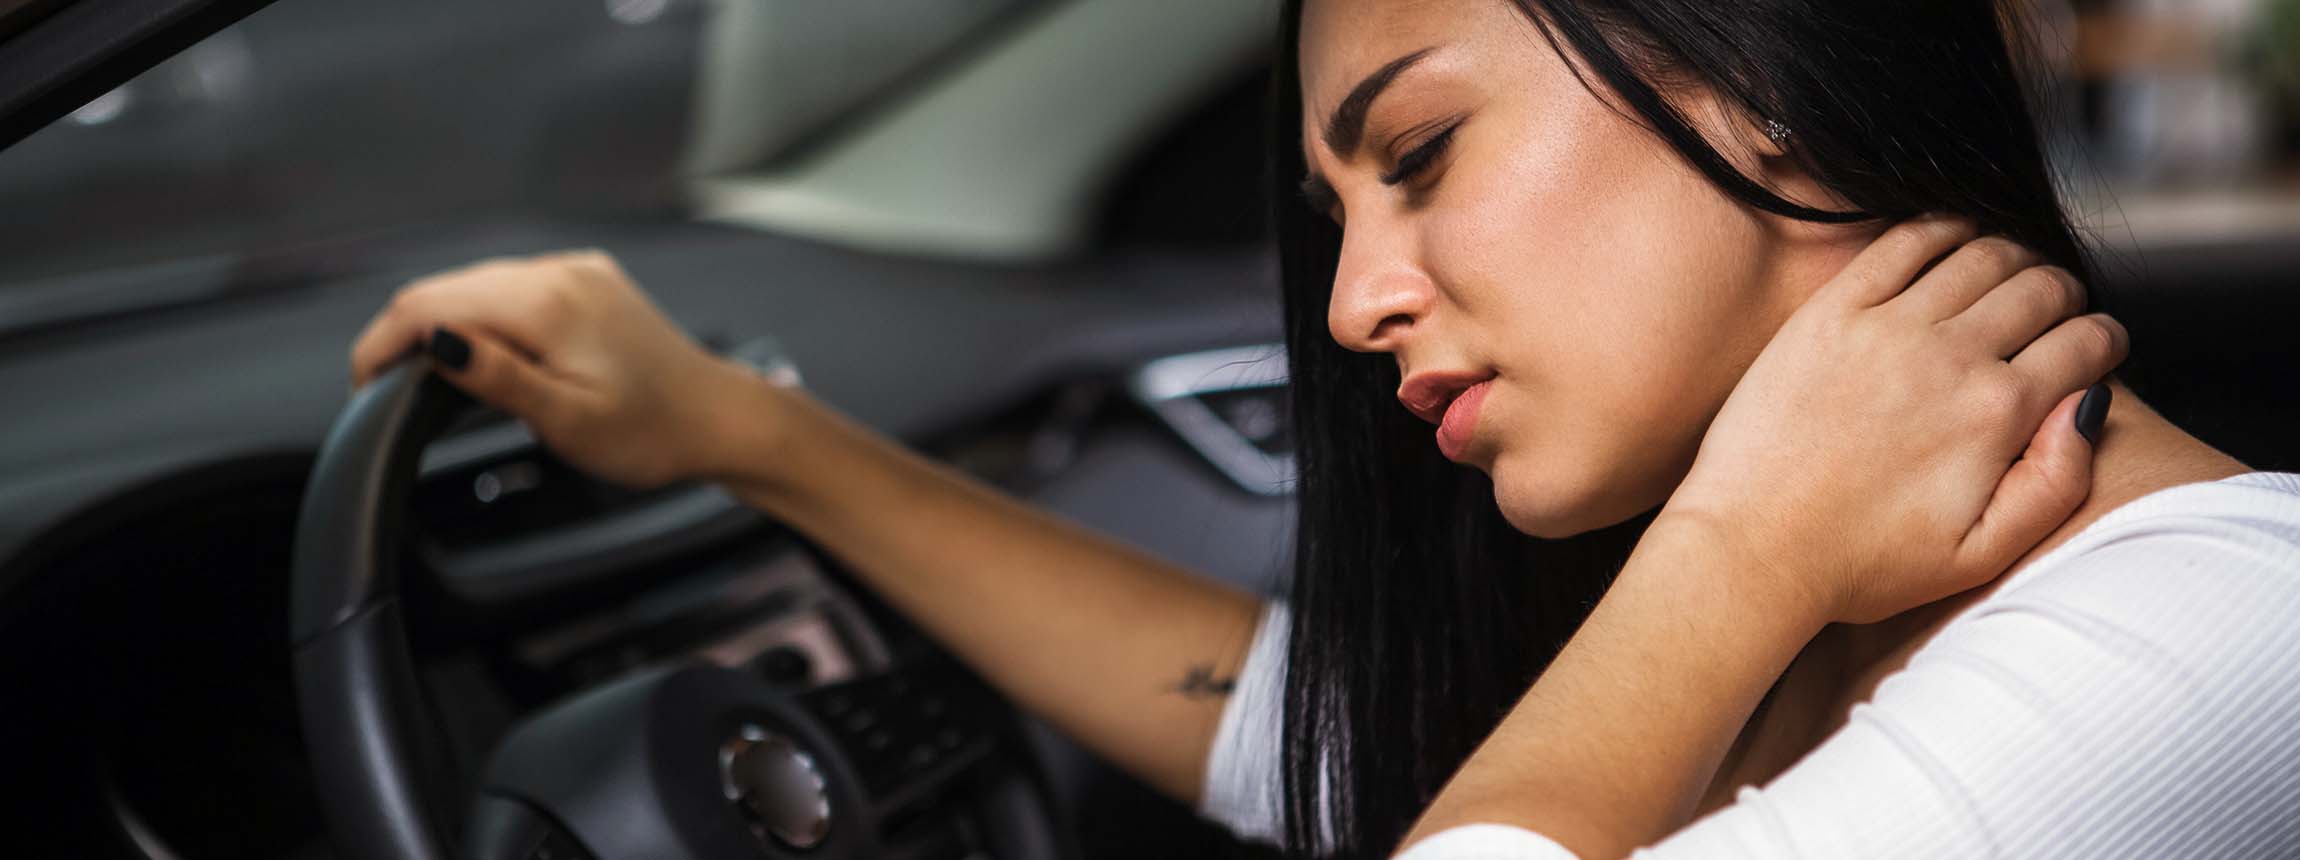 Young woman rubbing her neck, feeling sore after long drive